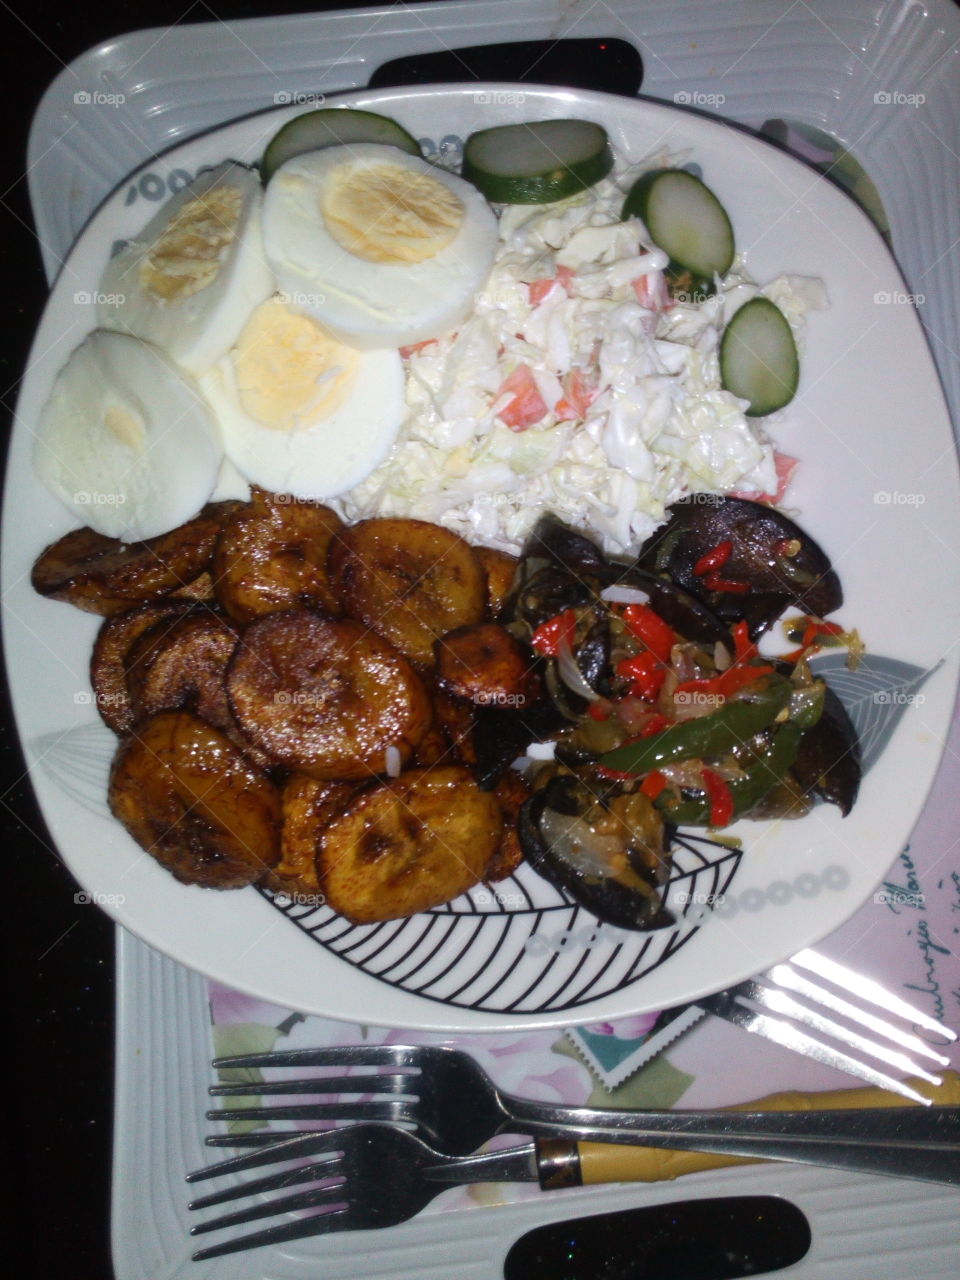 Salads, Plantains and Snails